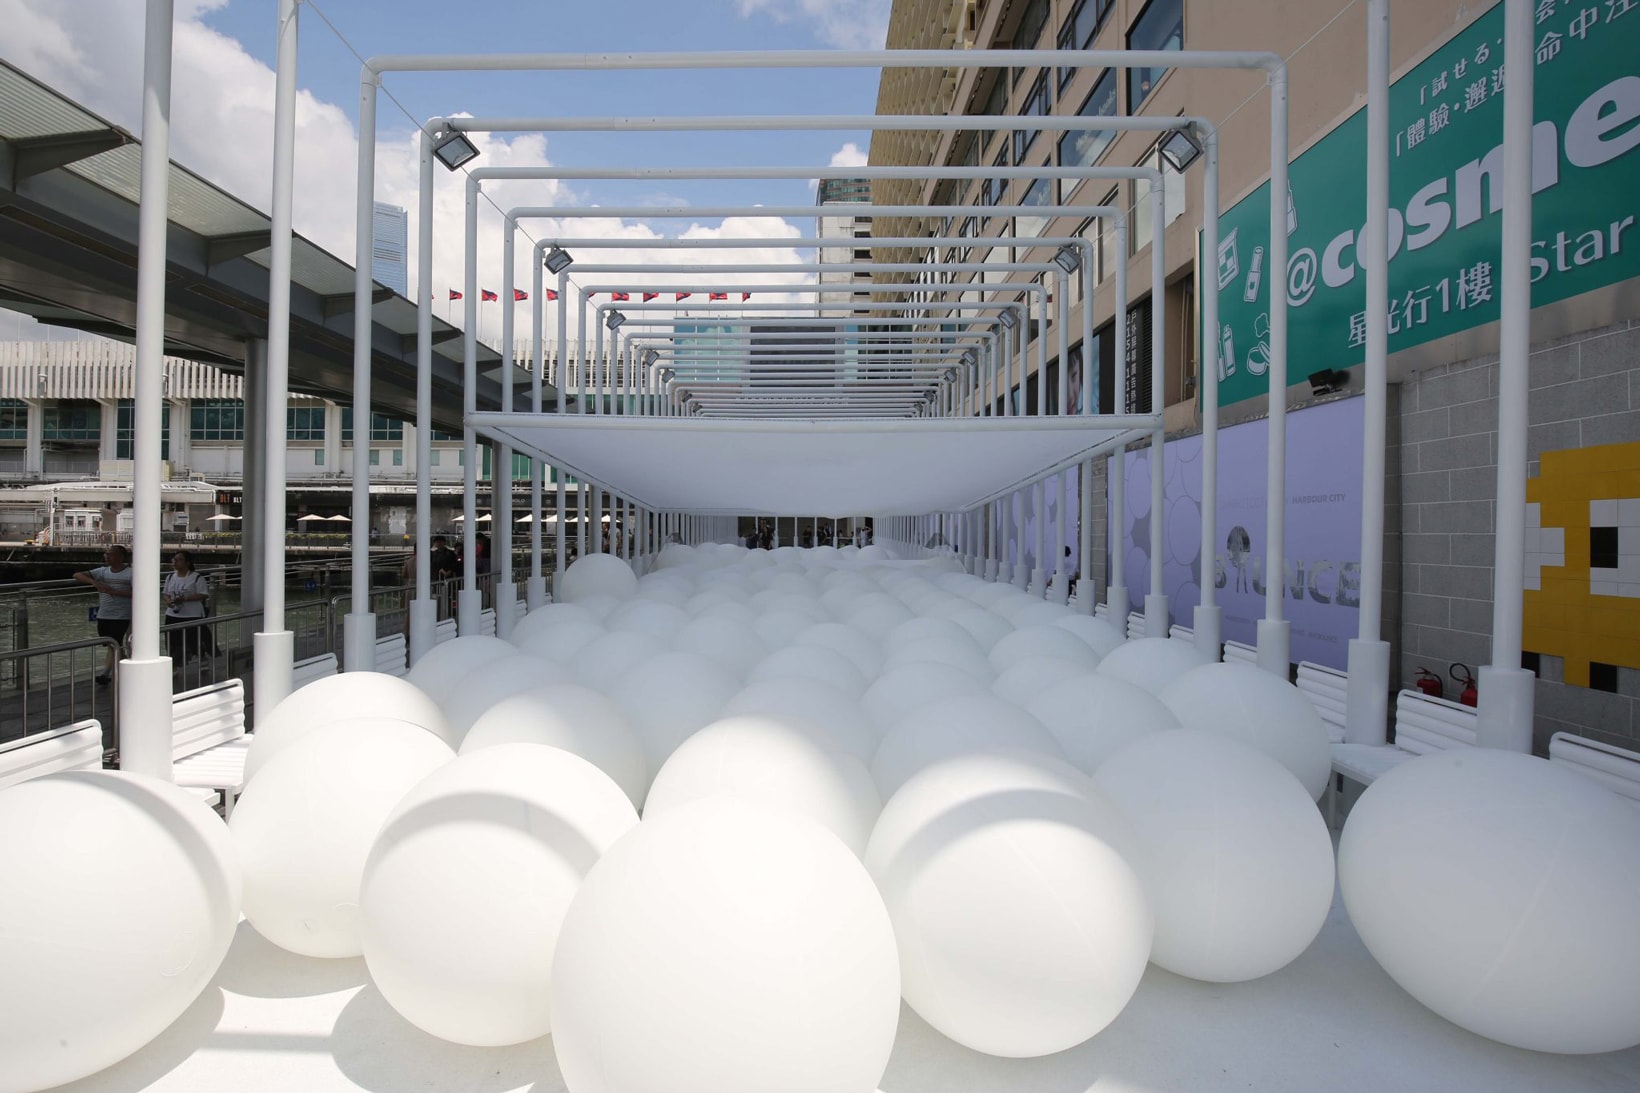 Nouvelle Installation Snarkitecture "BOUNCE"